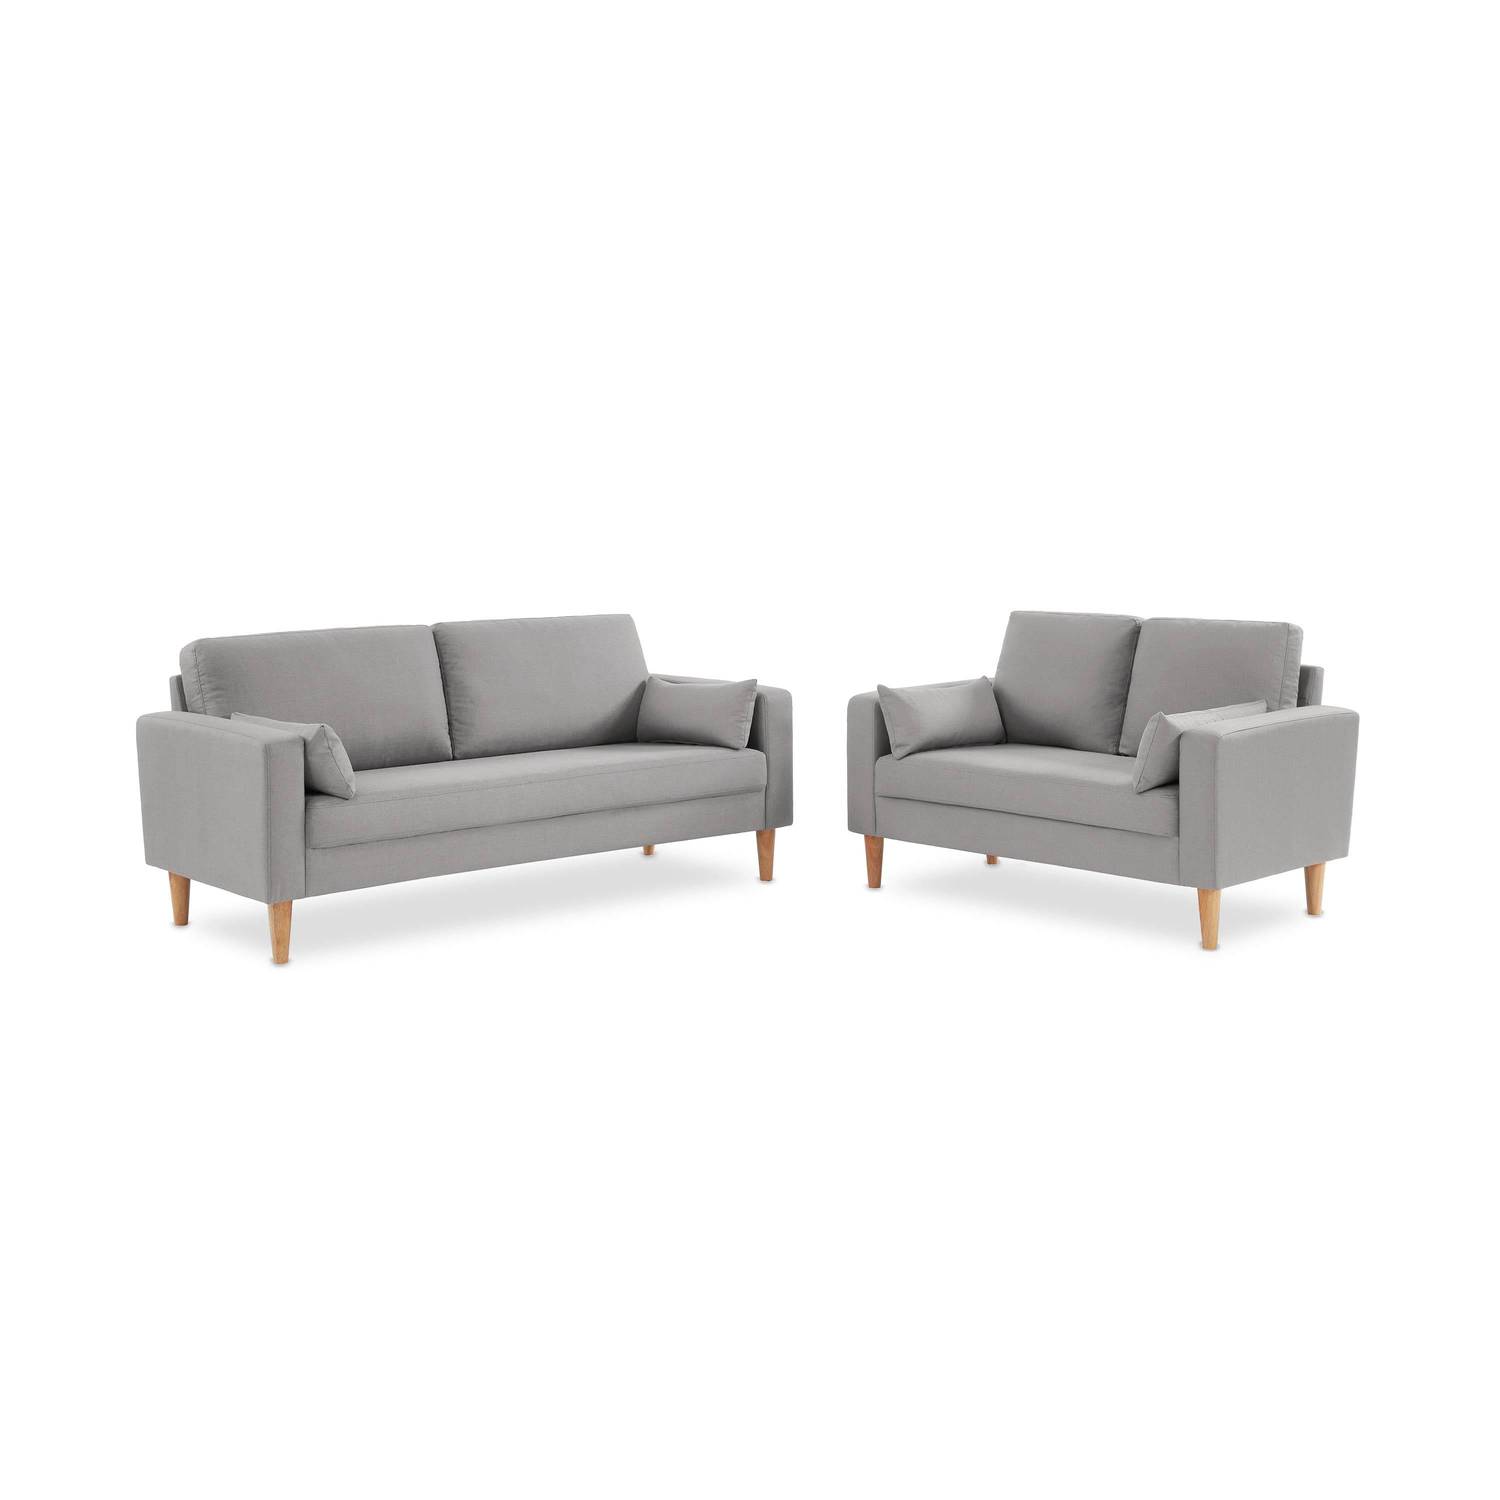 Large 3-seater sofa Scandi-style with wooden legs - Bjorn - Light Grey Photo5